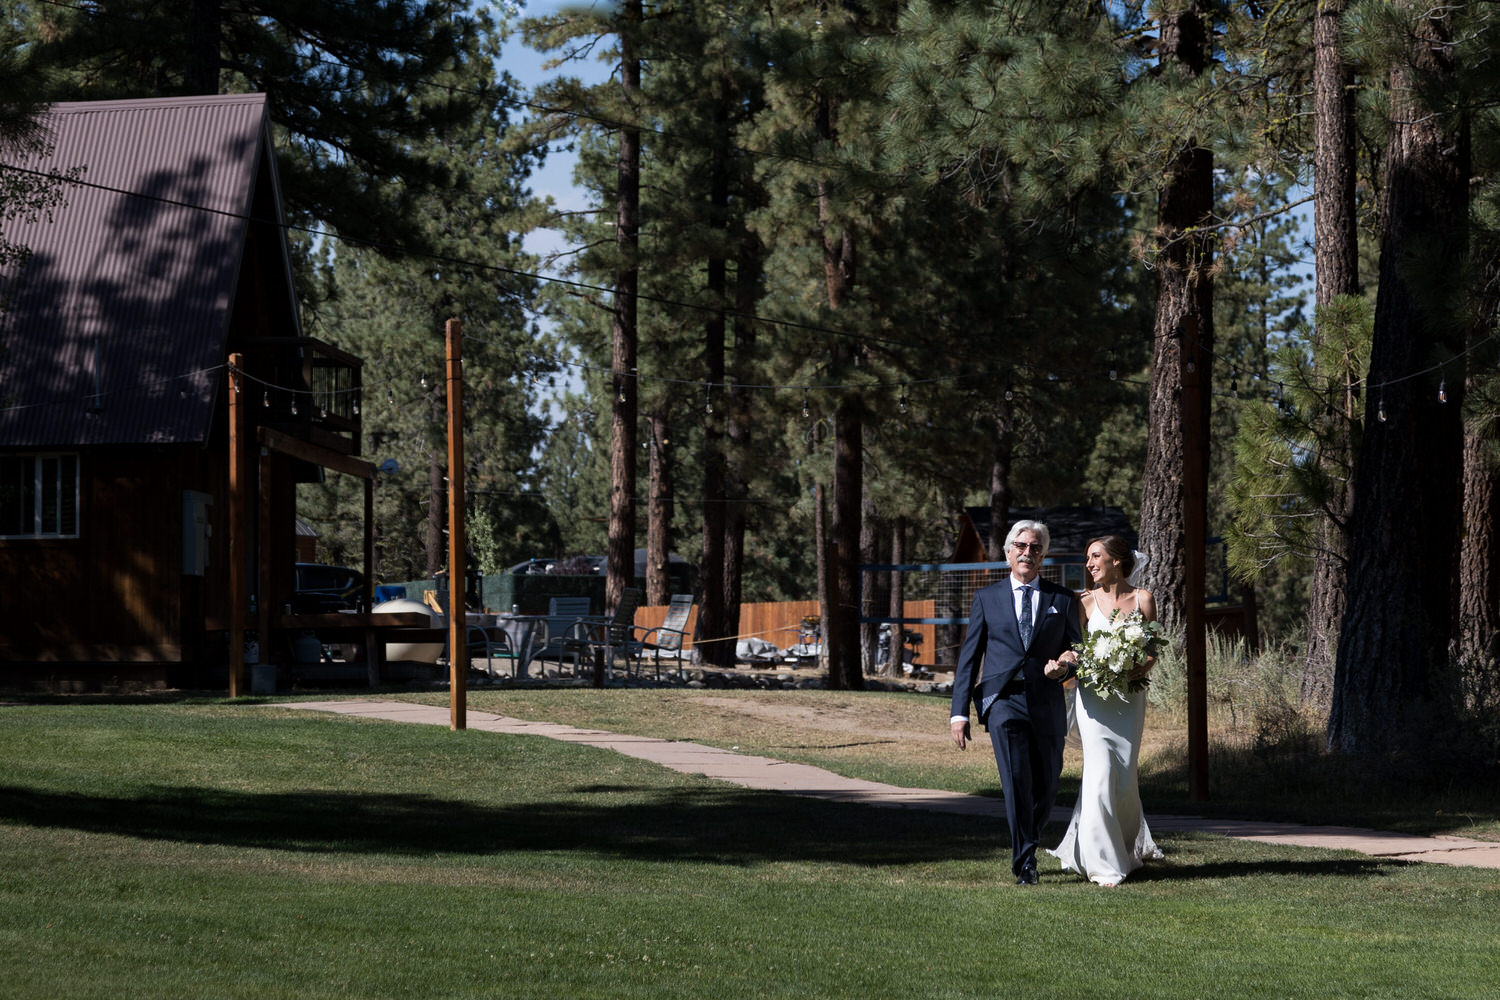 The father of the bride walks his daughter to the ceremony venue at Chalet View Lodge.